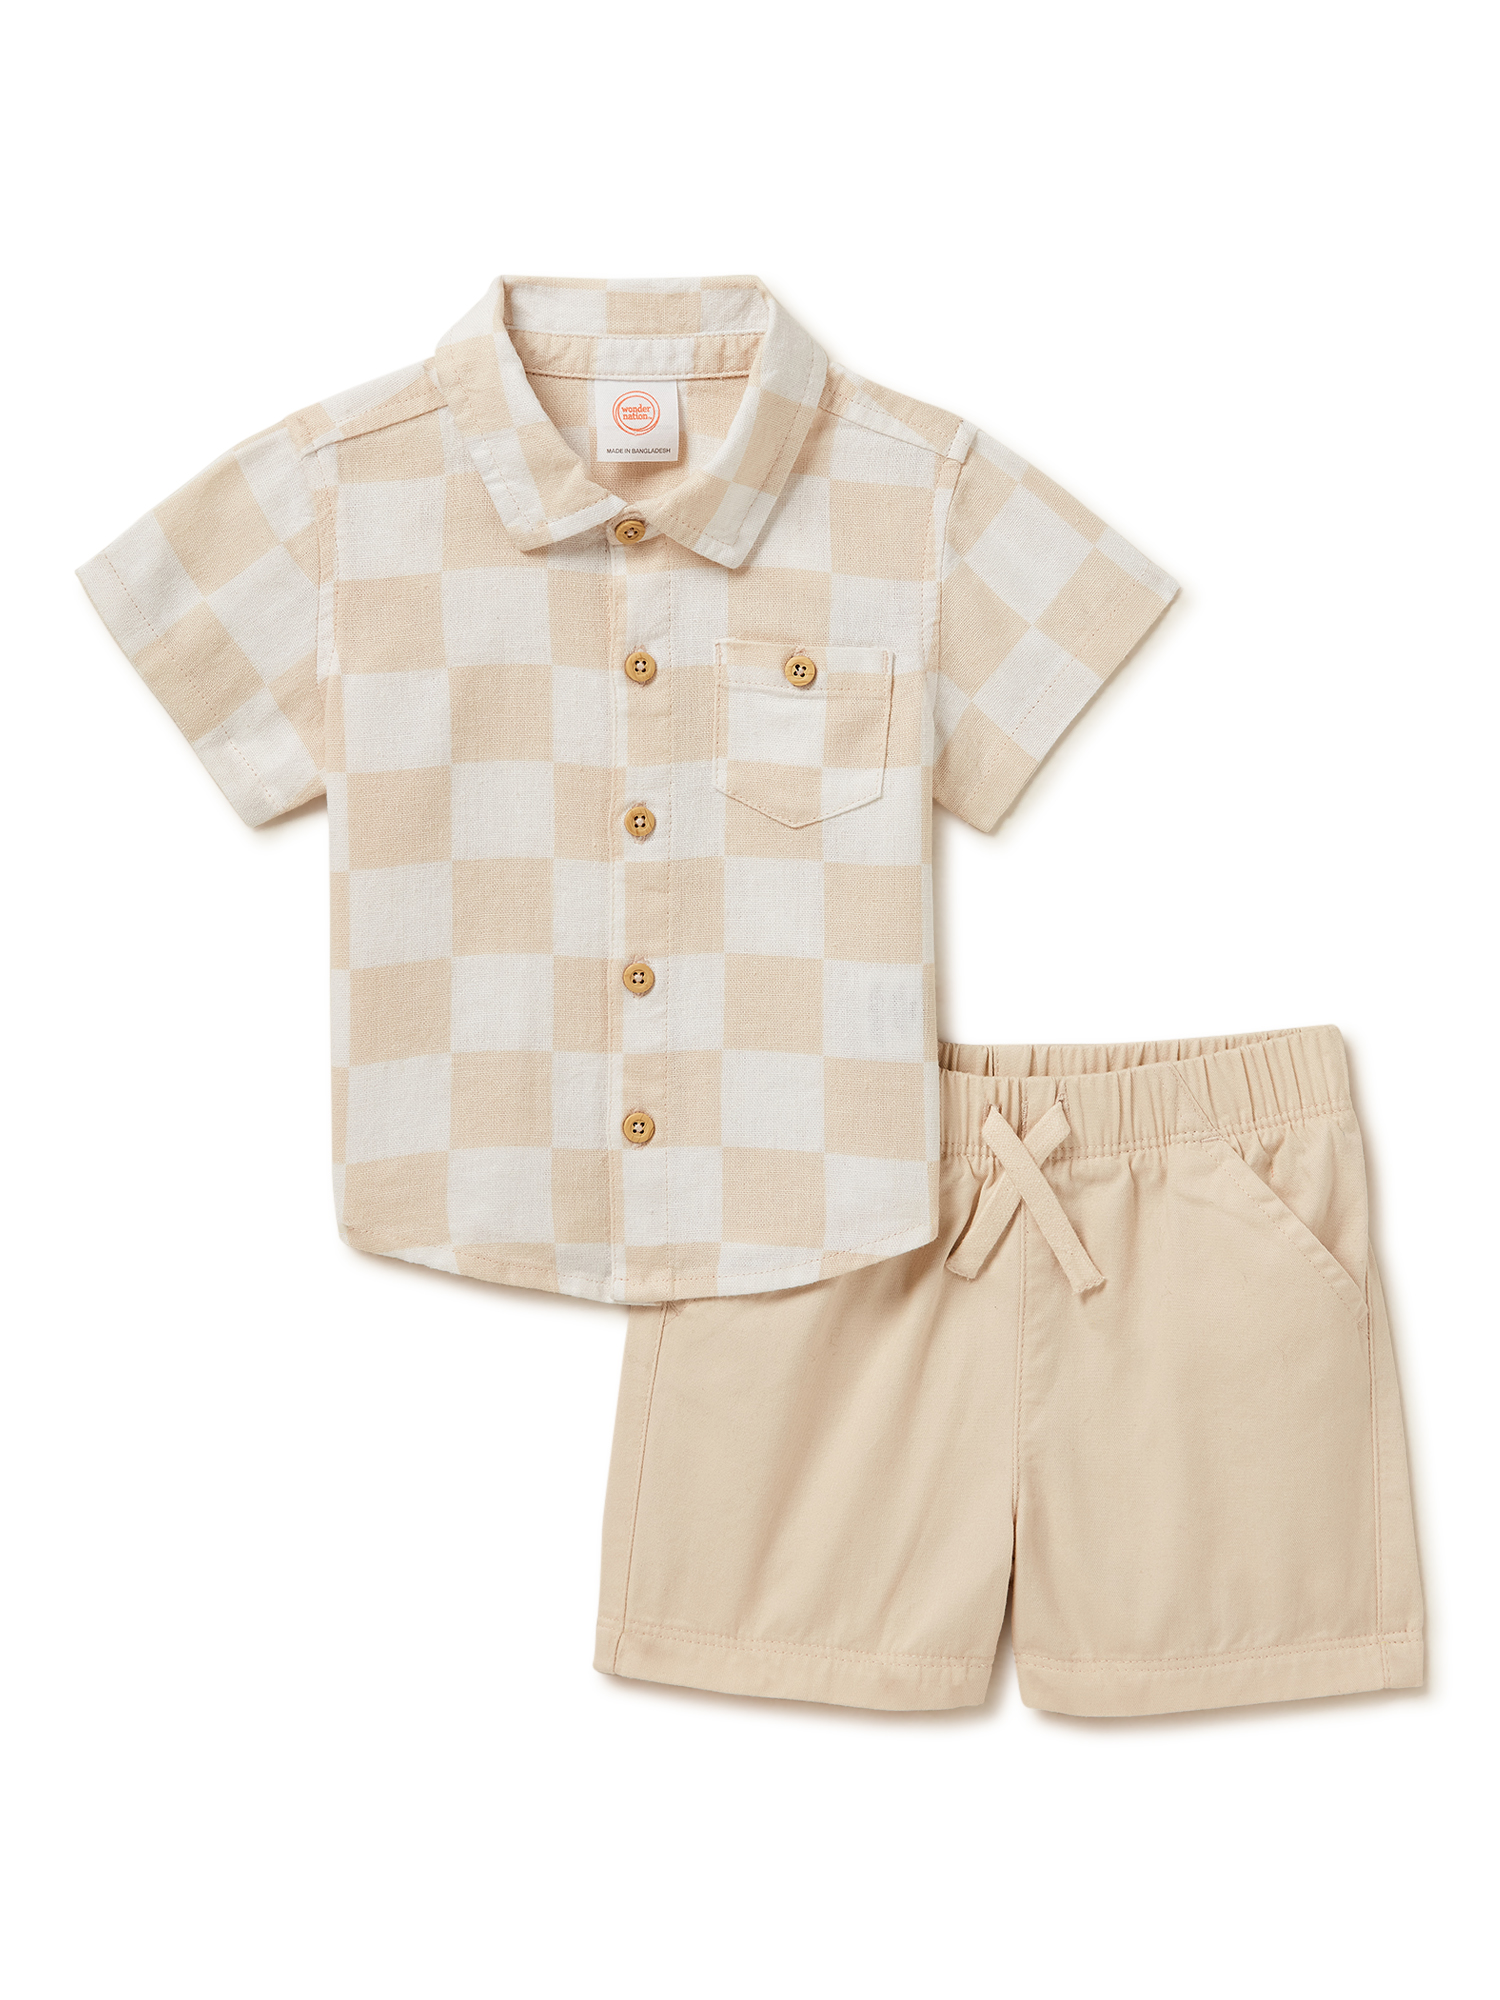 Wonder Nation Baby Boys Checkered Button Down Shirt and Shorts, 2-Piece Resort Set, Sizes 0-24 Months - image 1 of 9